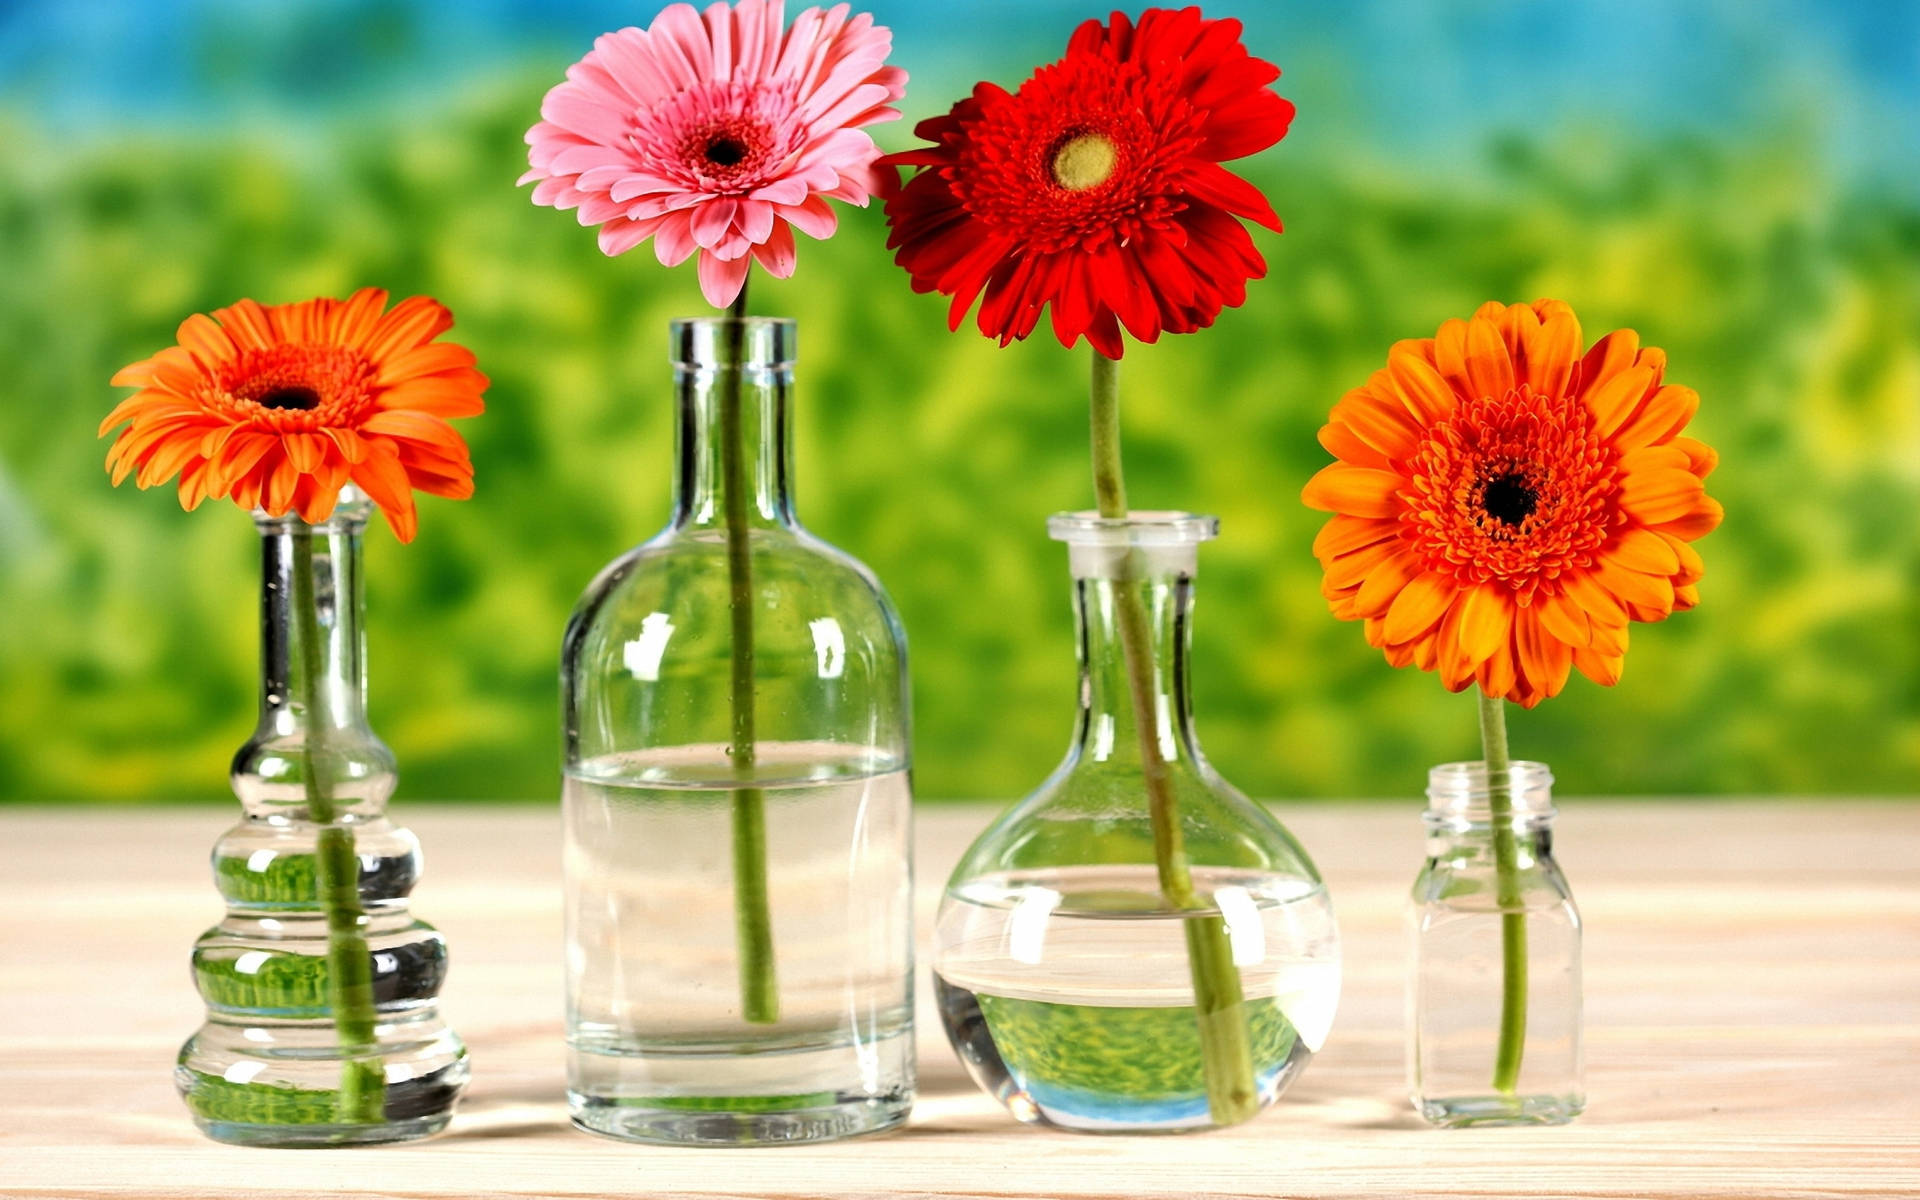 Static Flowers In A Bottle Background